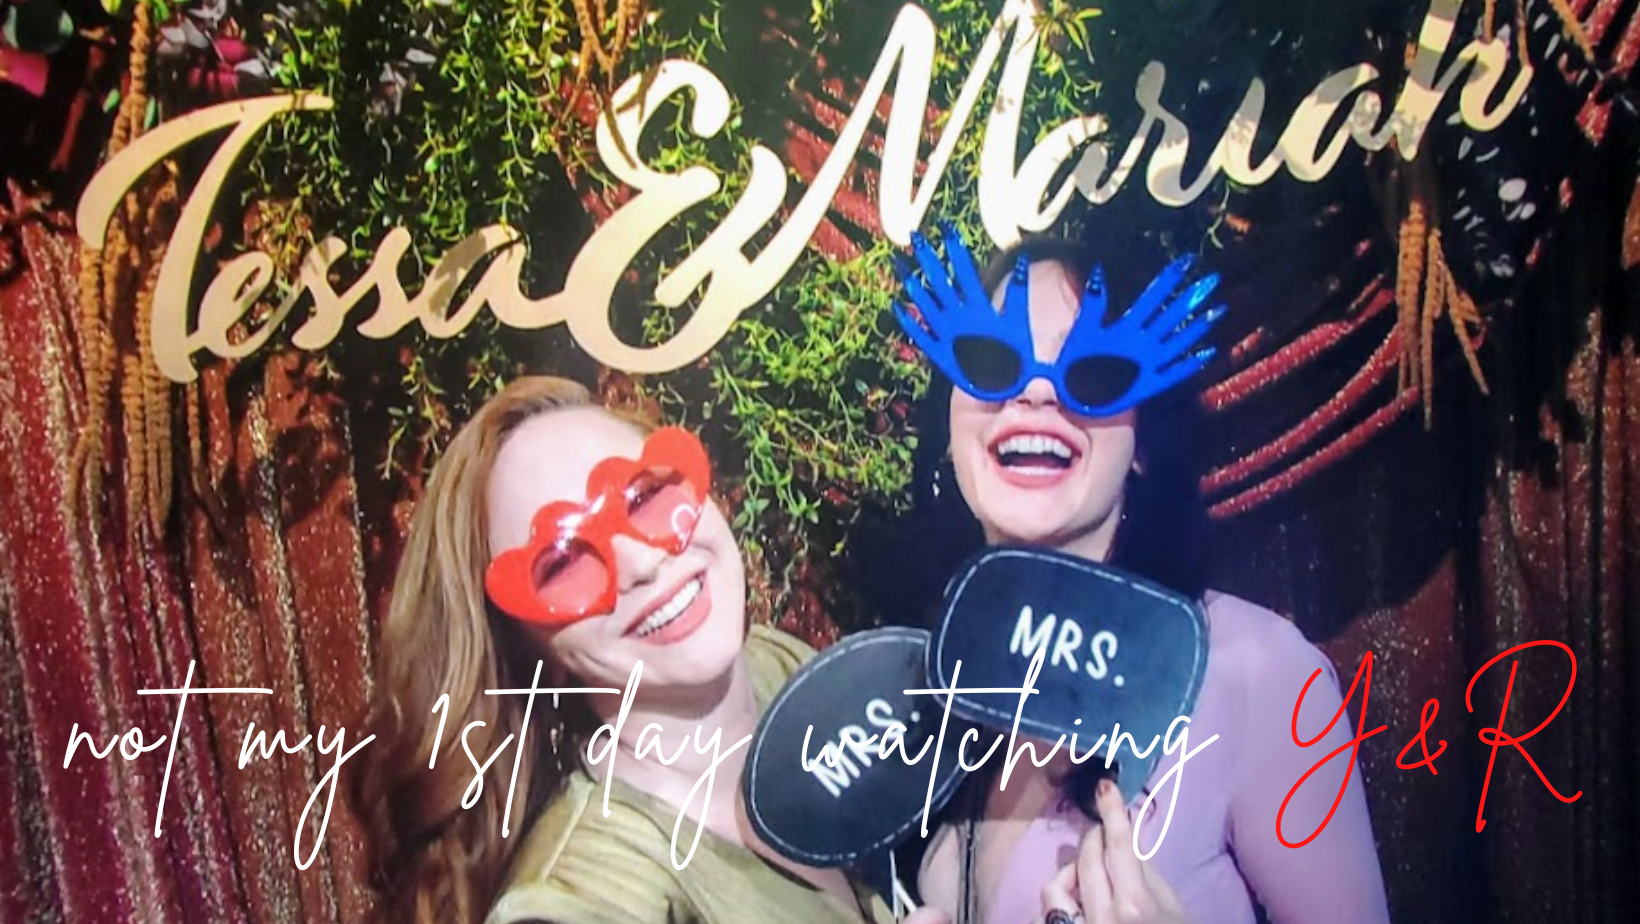 Tessa & Mariah's engagement party photos on Y&R.